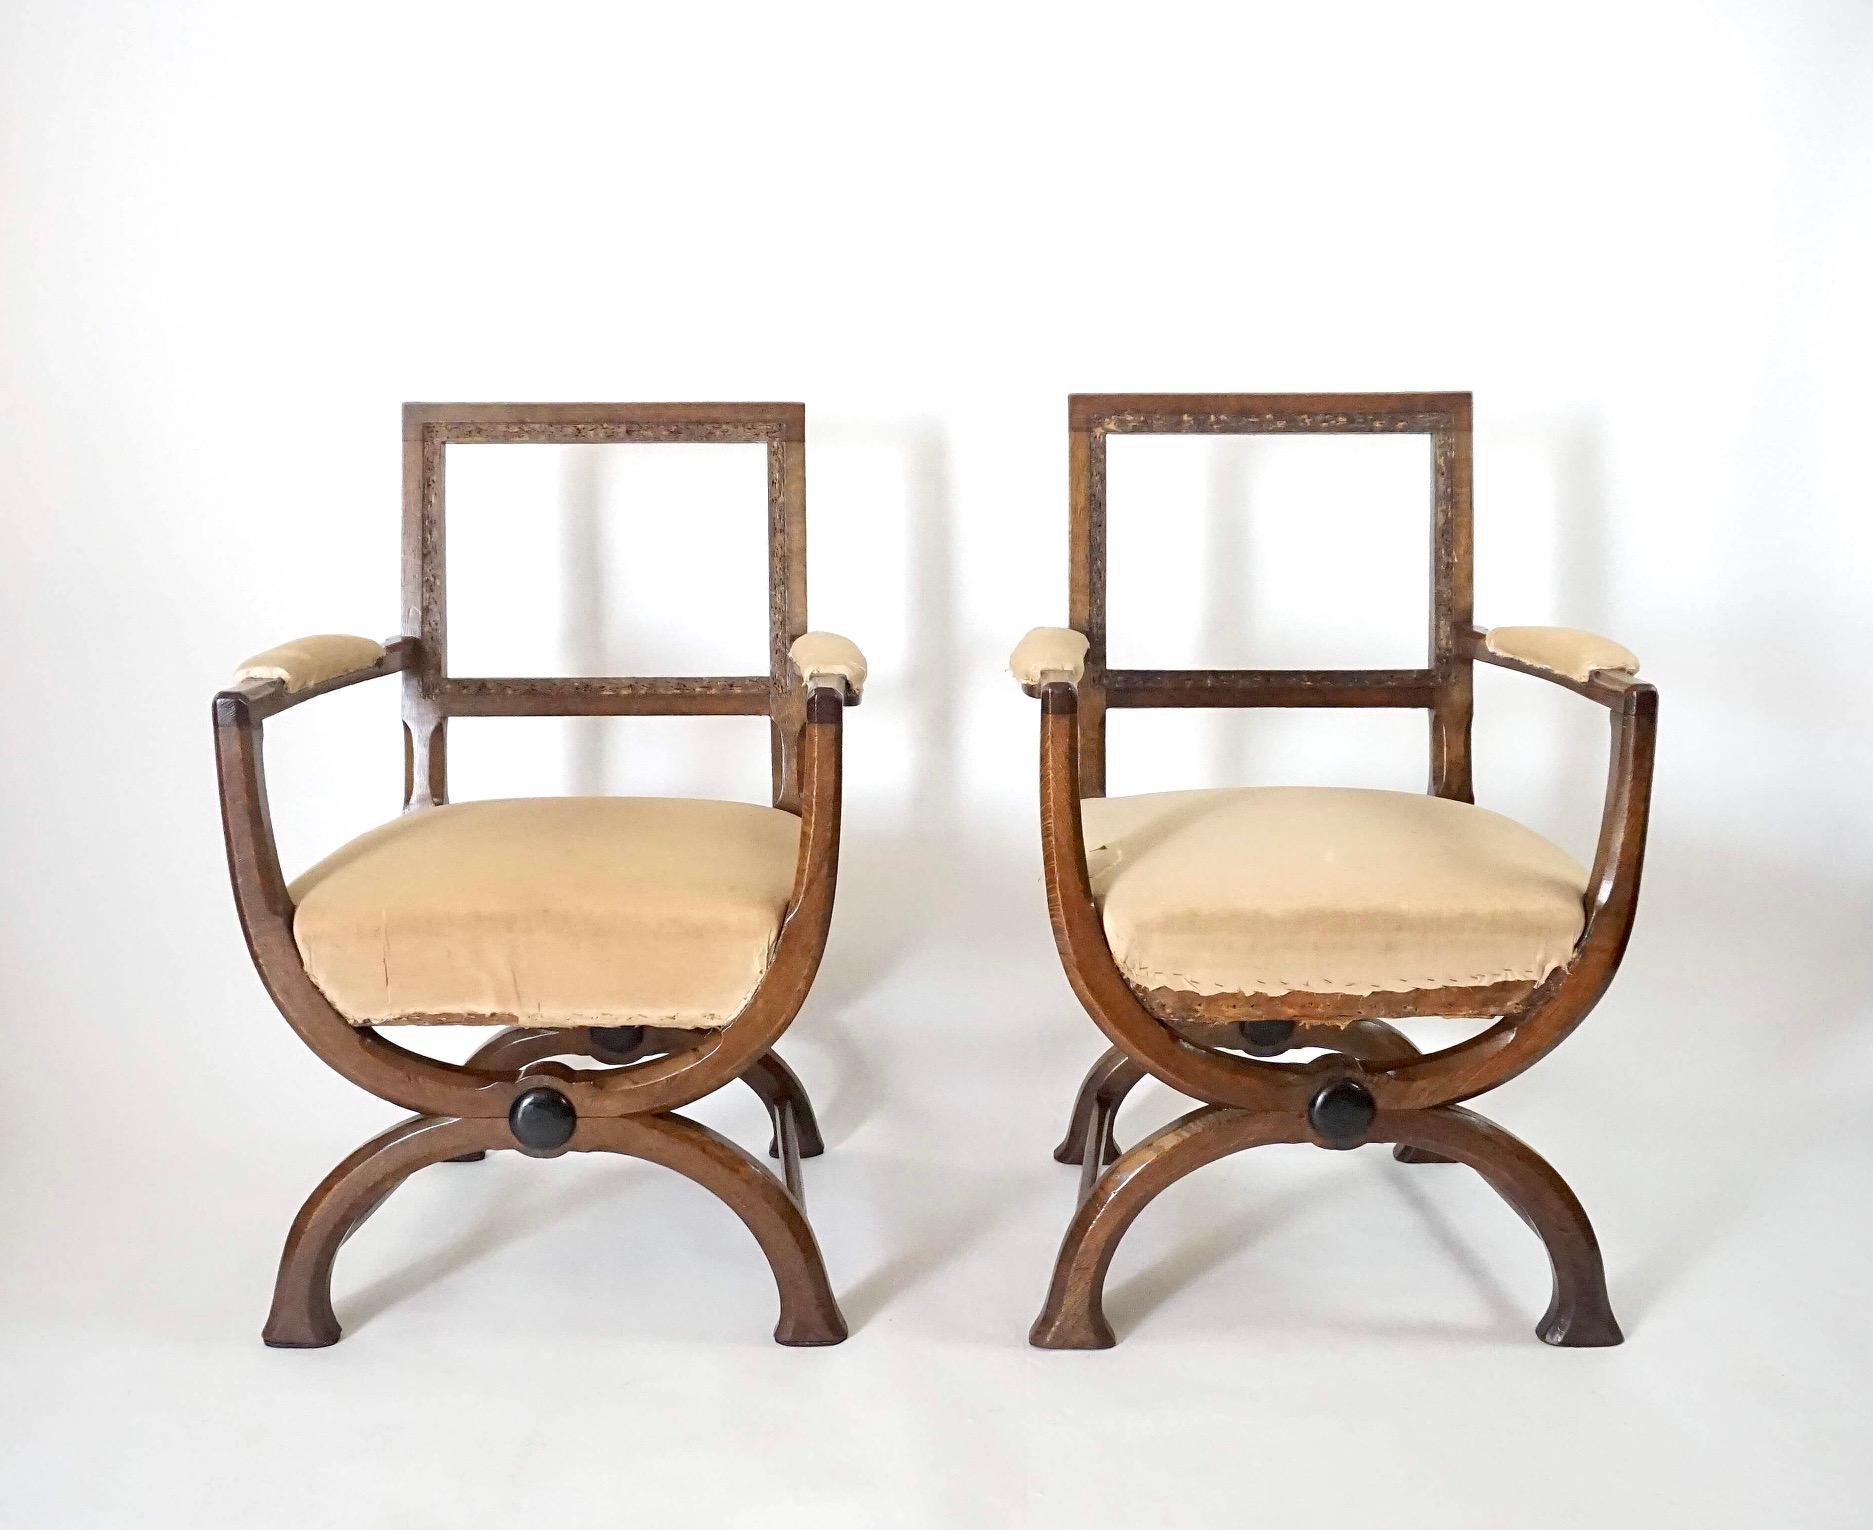 Gothic Revival English Oak Gothic Style Curule Armchairs Attributed to A.W.N. Pugin, circa 1830 For Sale